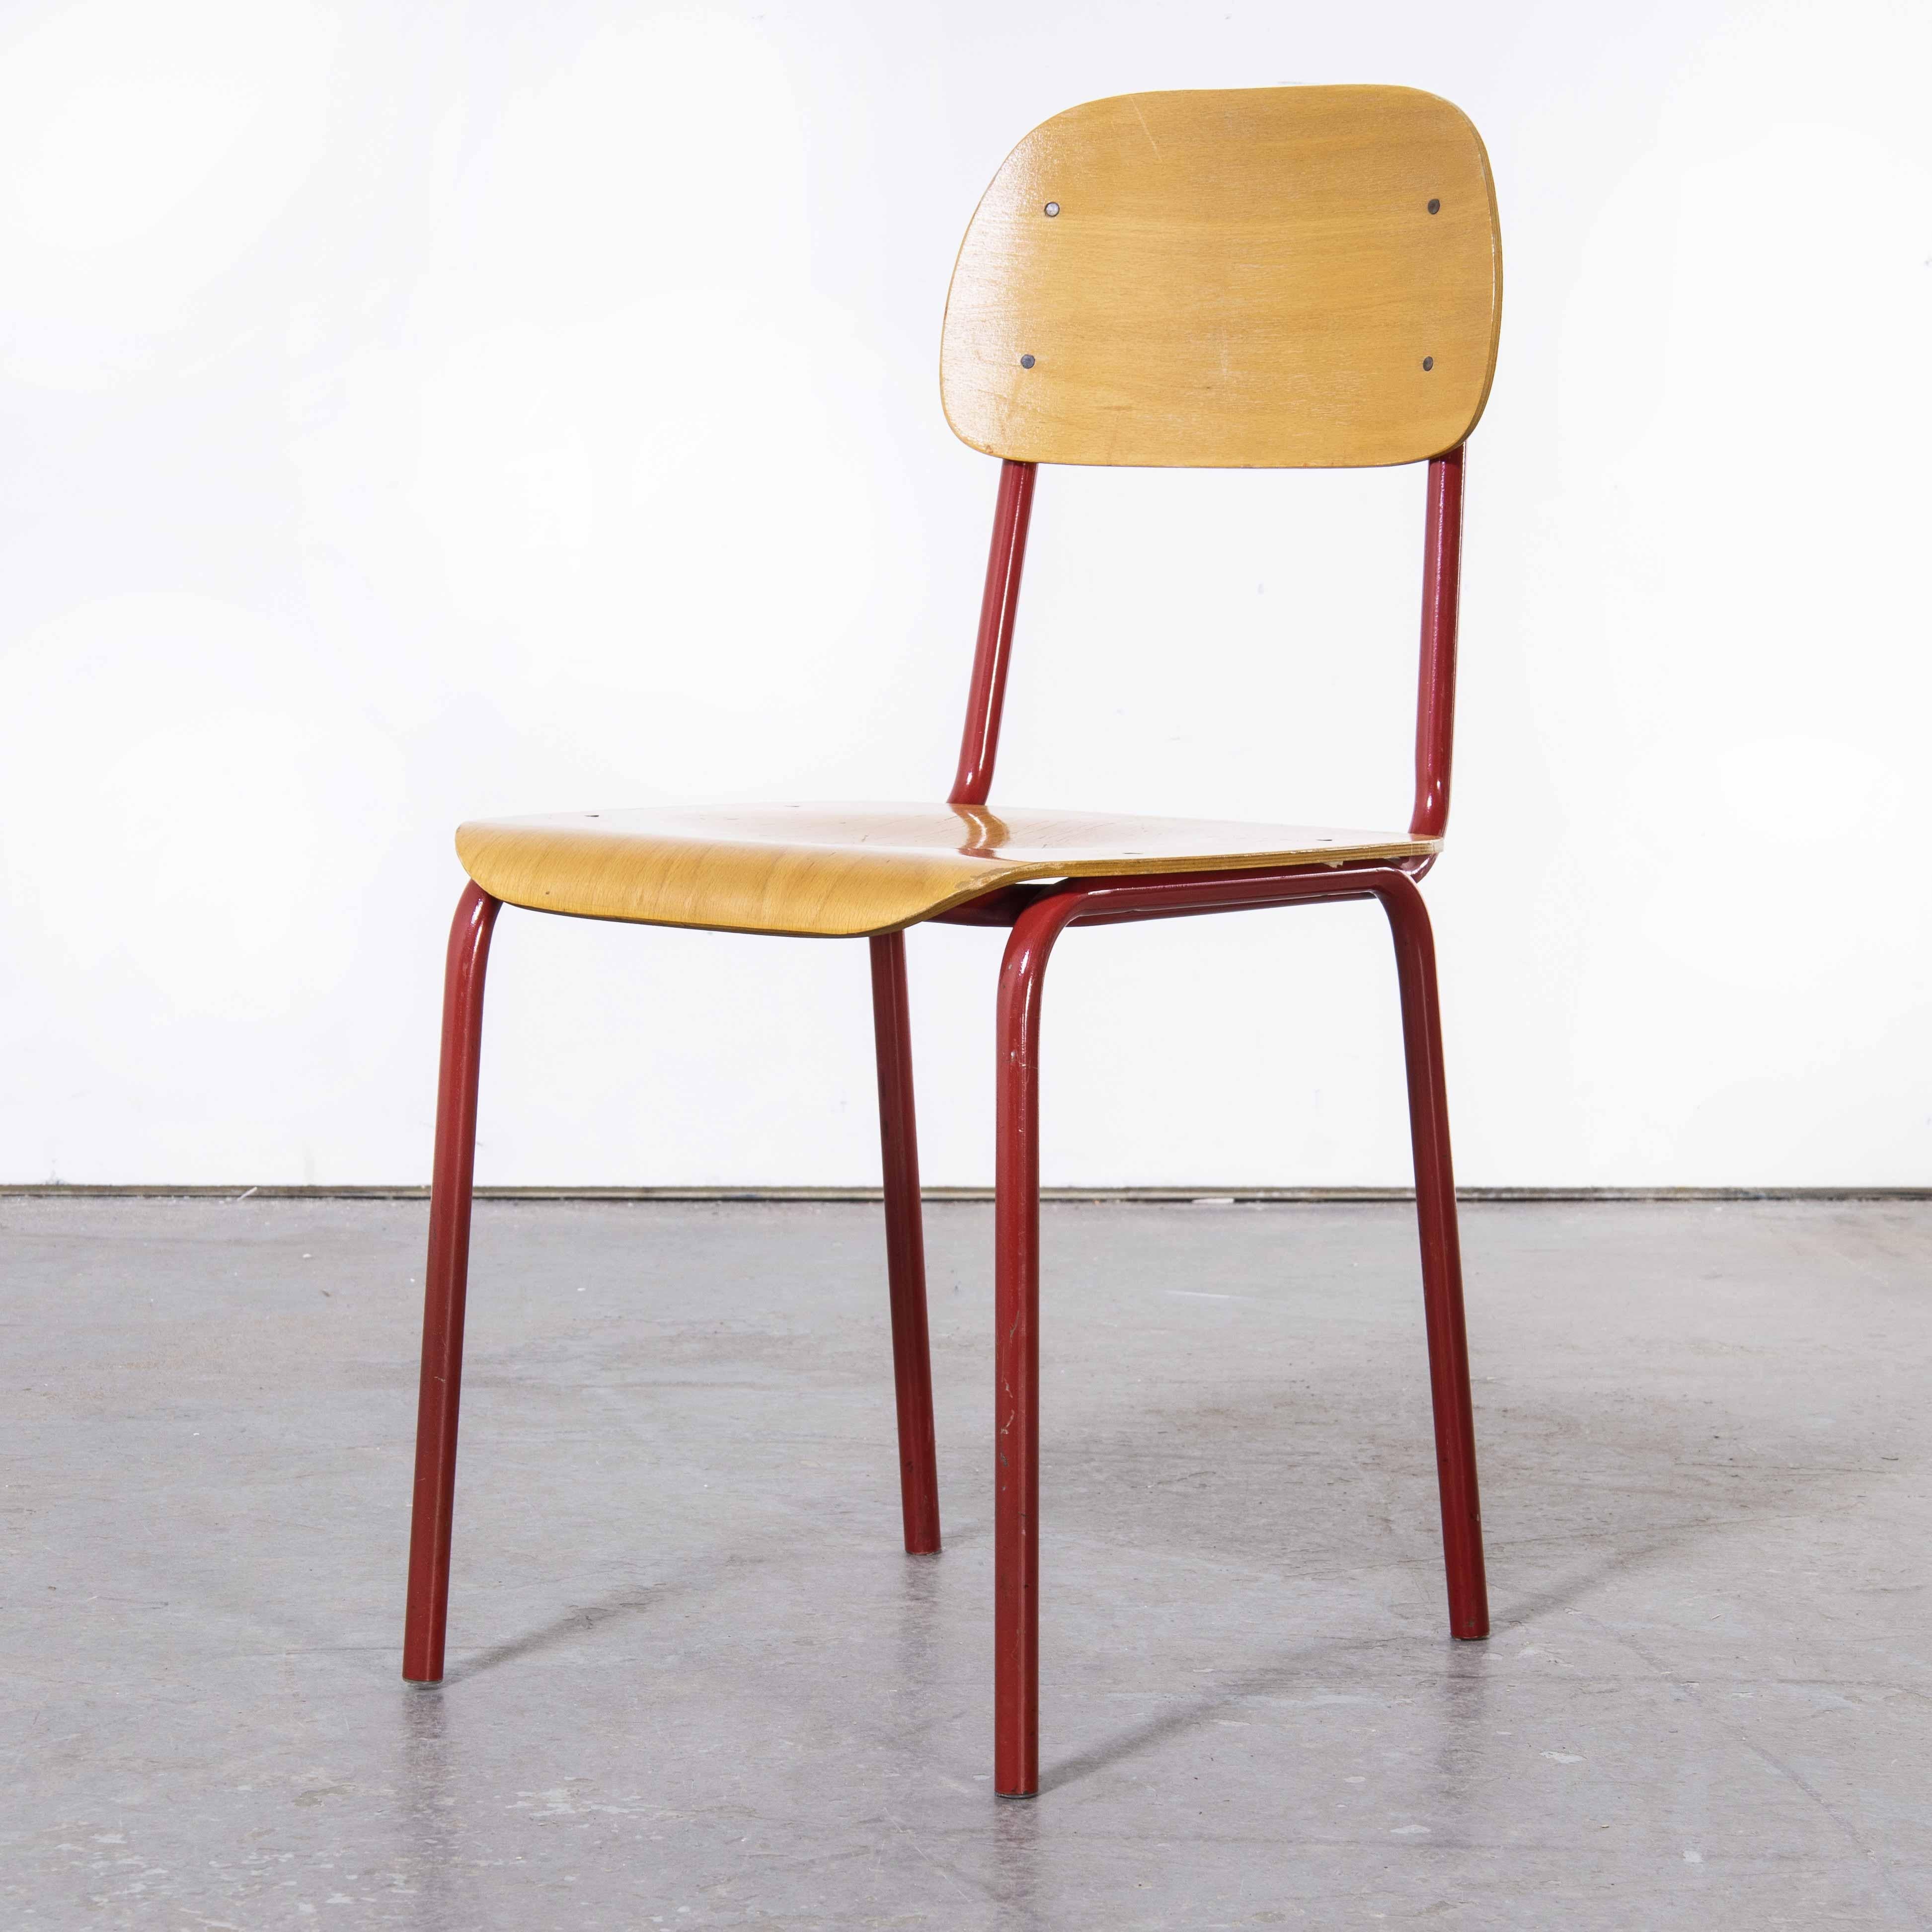 Late 20th Century 1970's Czech Industrial Stacking Chairs, Red, Various Quantities Available For Sale